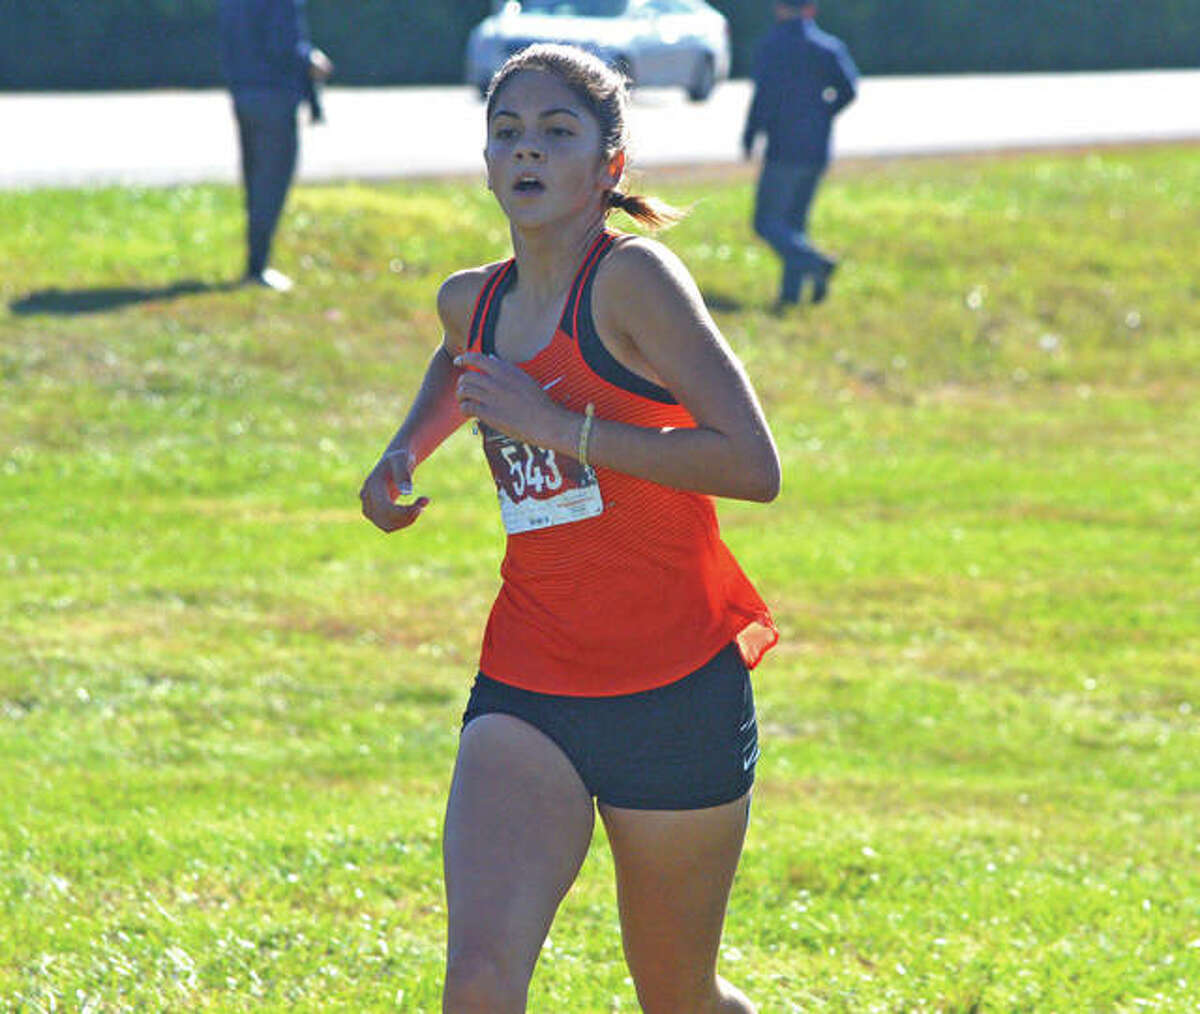 Edwardsville junior Abby Korak is on her way to a first-place finish in Saturday’s Class 3A Edwardsville Regional at SIUE. Korak is a two-time regional champion.